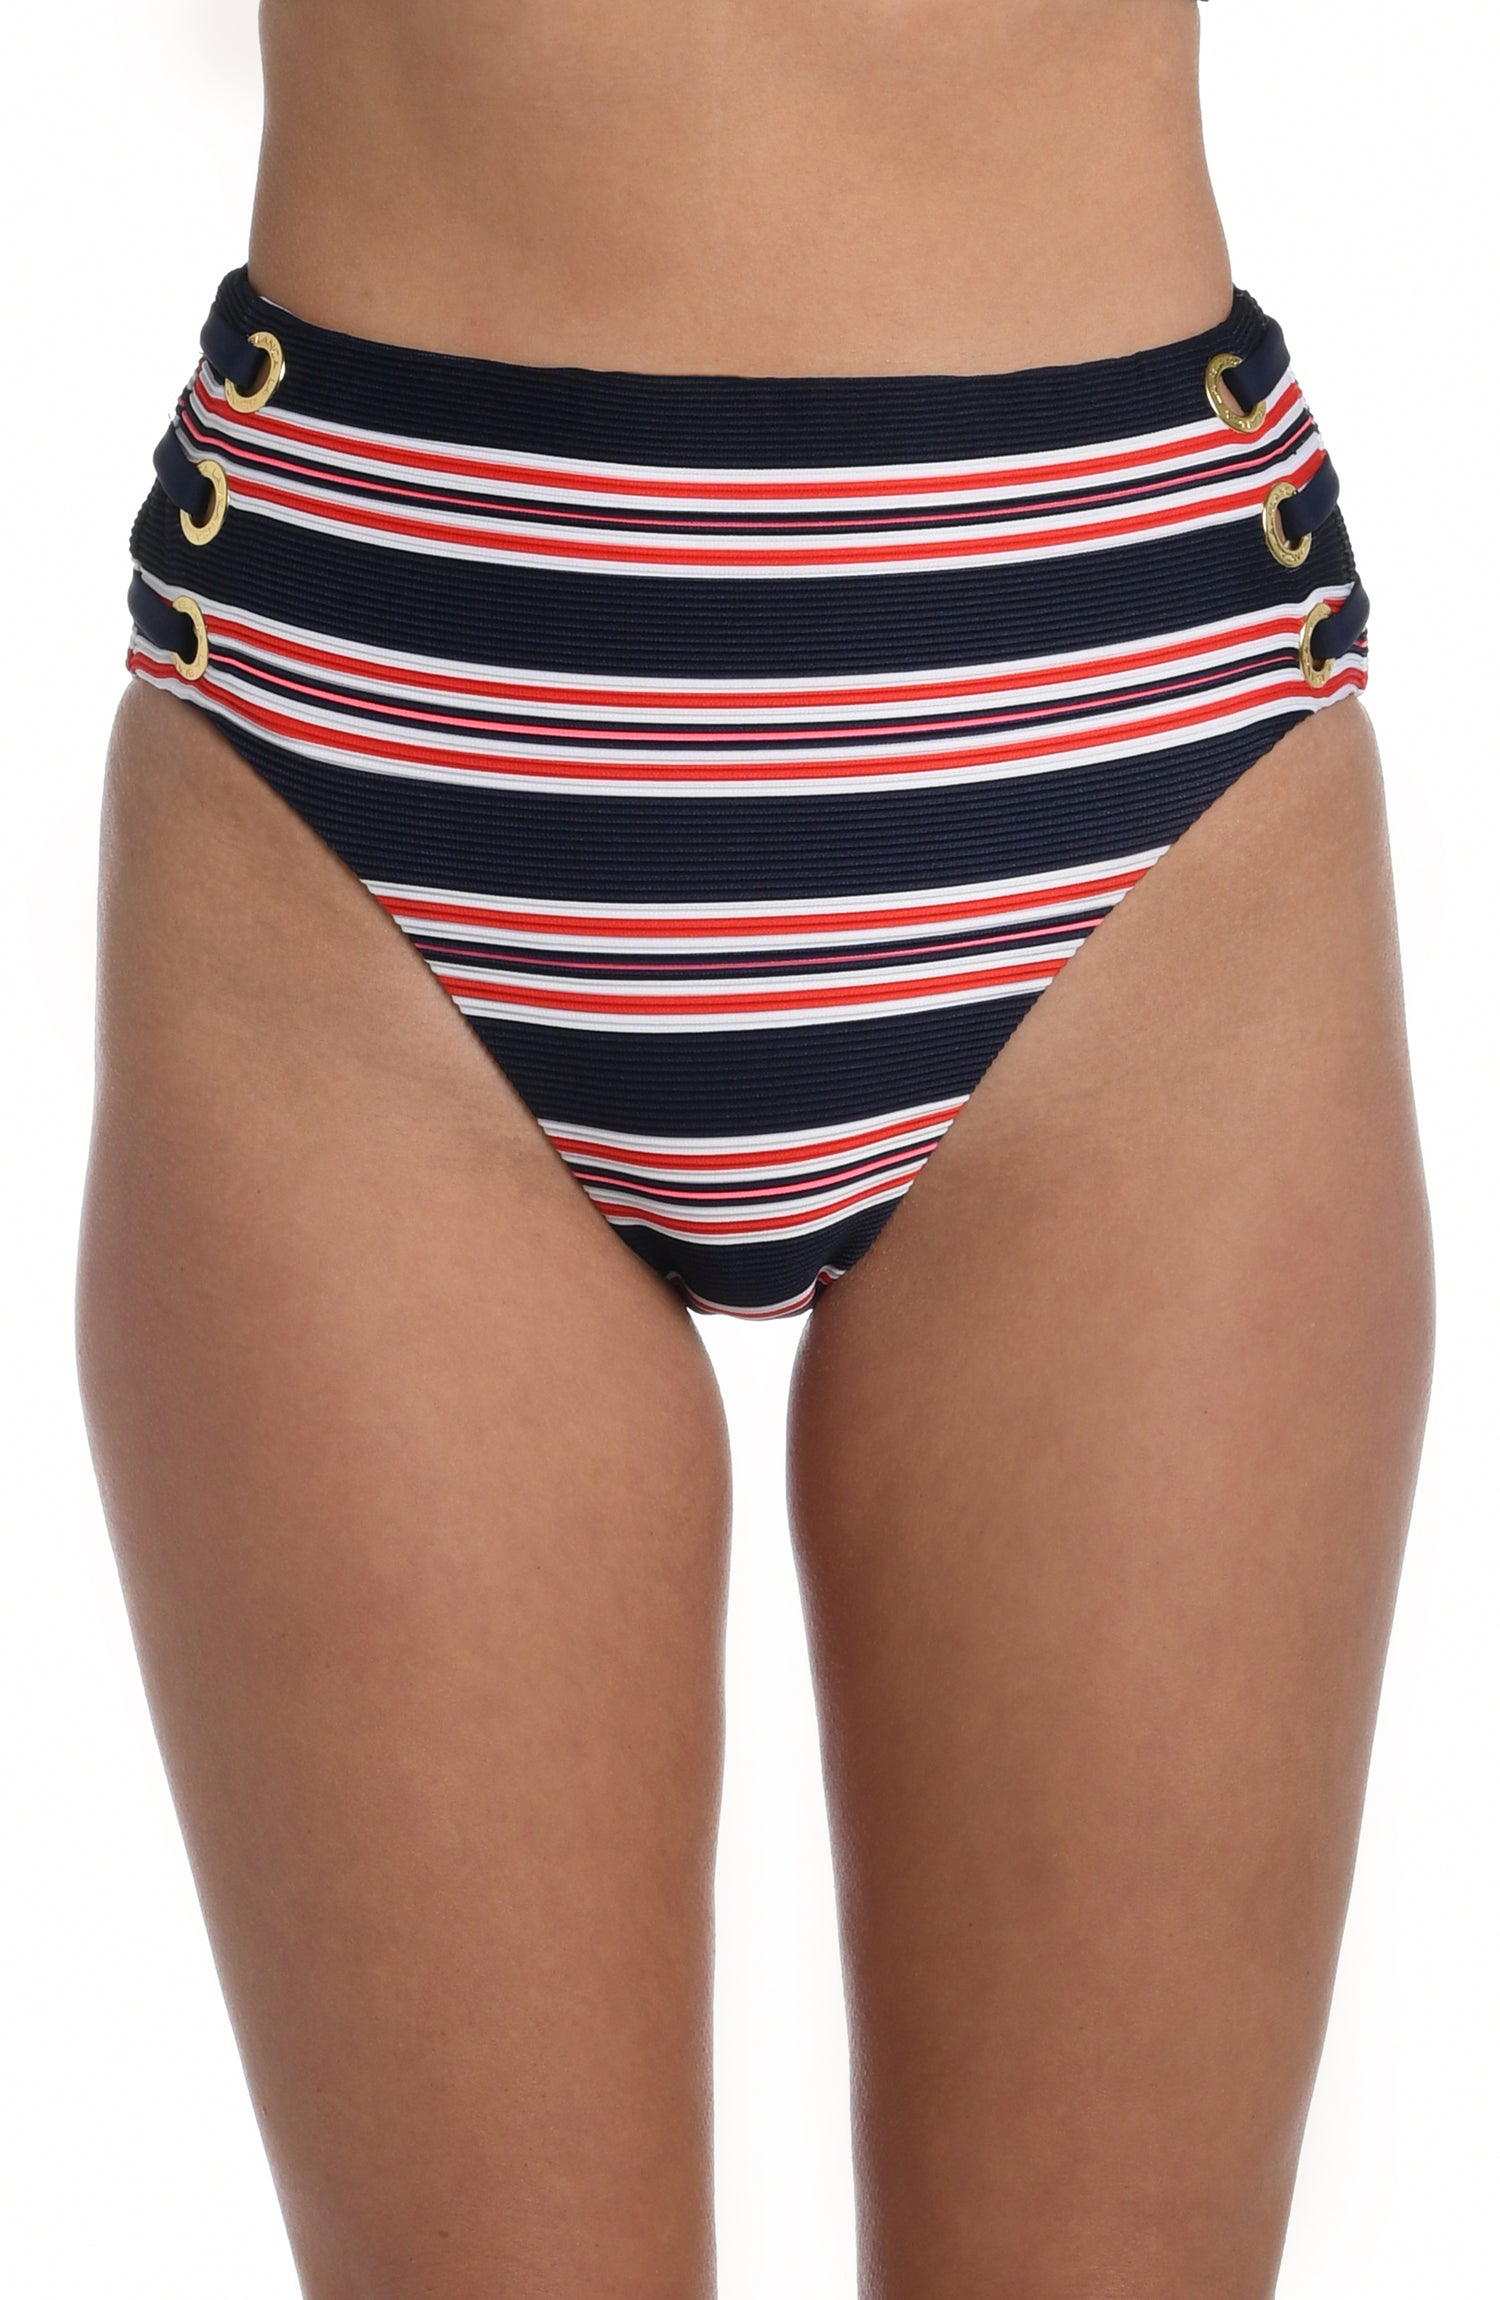 Model is wearing a red, white, and blue striped patterned high waist bottom from our Sailor Stripe collection!